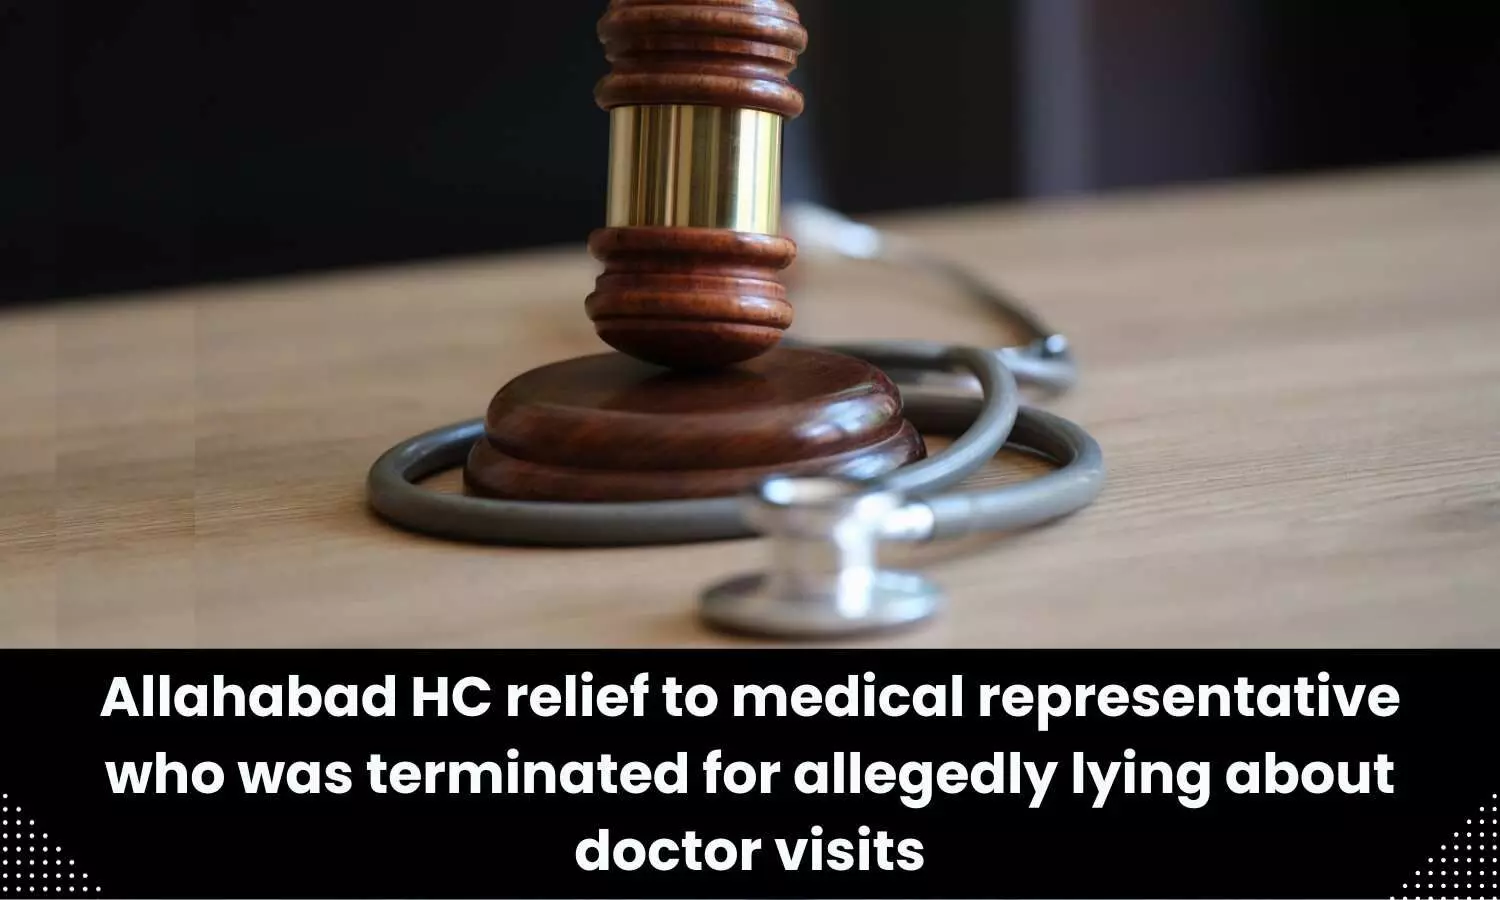 Allahabad HC relief to medical representative who was terminated for allegedly lying about doctor visits